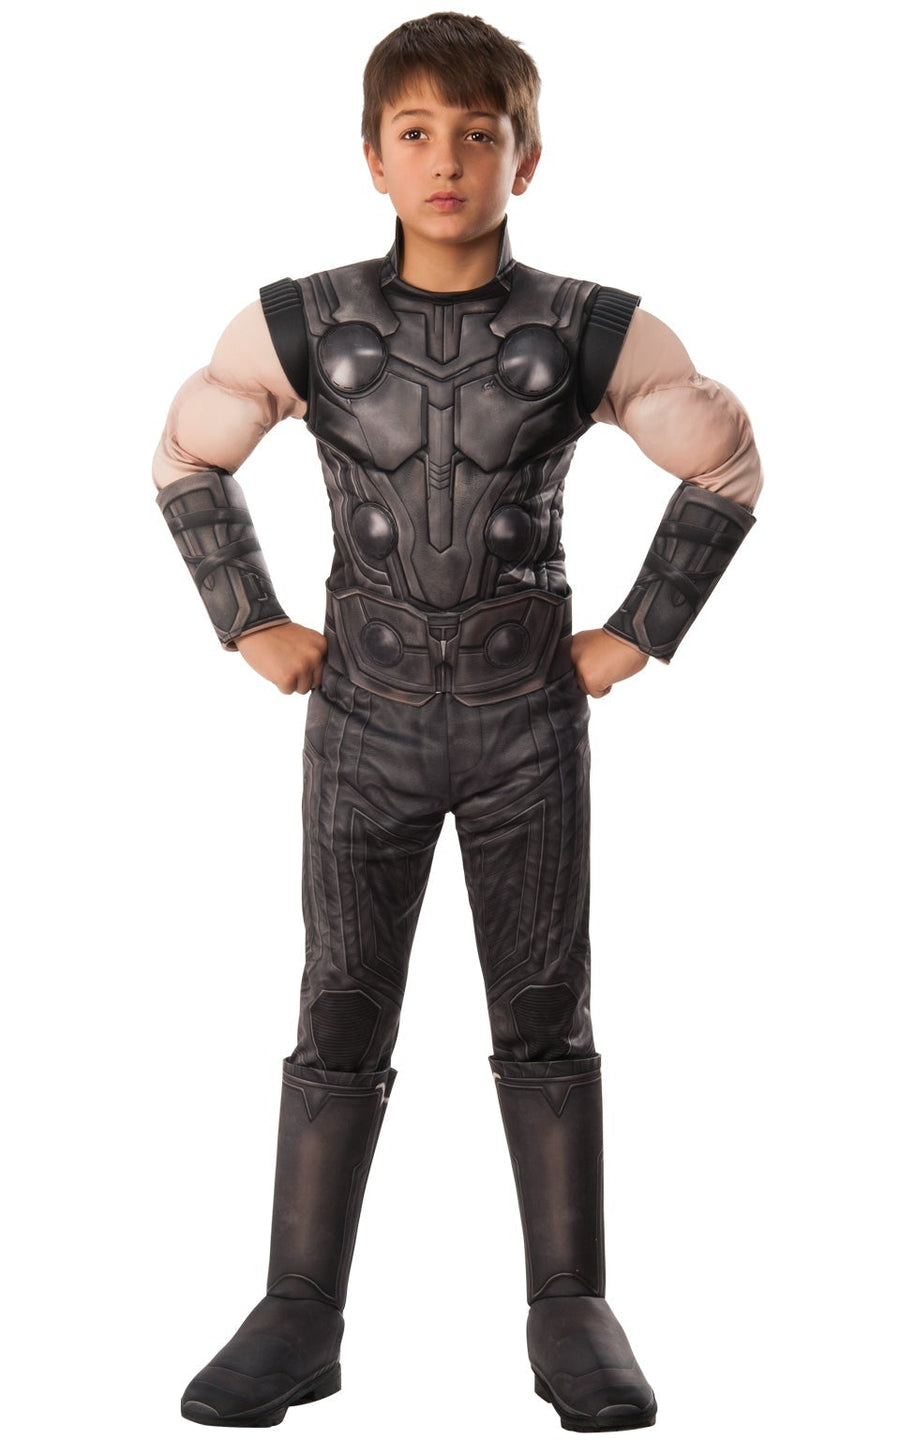 Deluxe Thor Inifinity War Boys Costume 1 rub-641312L MAD Fancy Dress